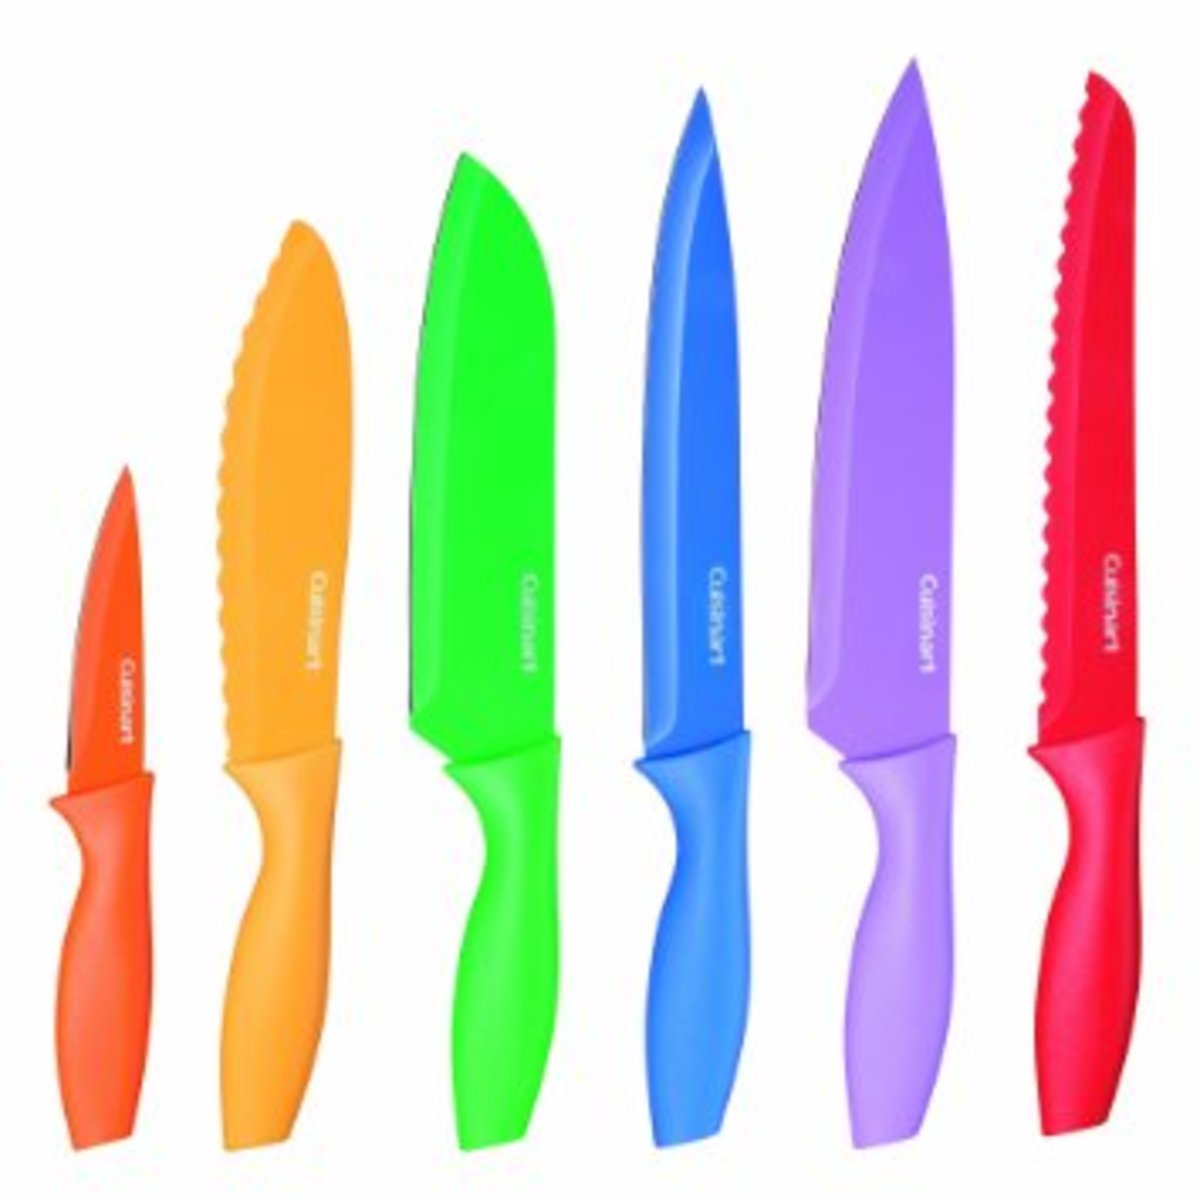 https://images.saymedia-content.com/.image/t_share/MTc0NjE5NzQ2MDgyNDk4NTA1/10-best-kitchen-knife-sets.jpg